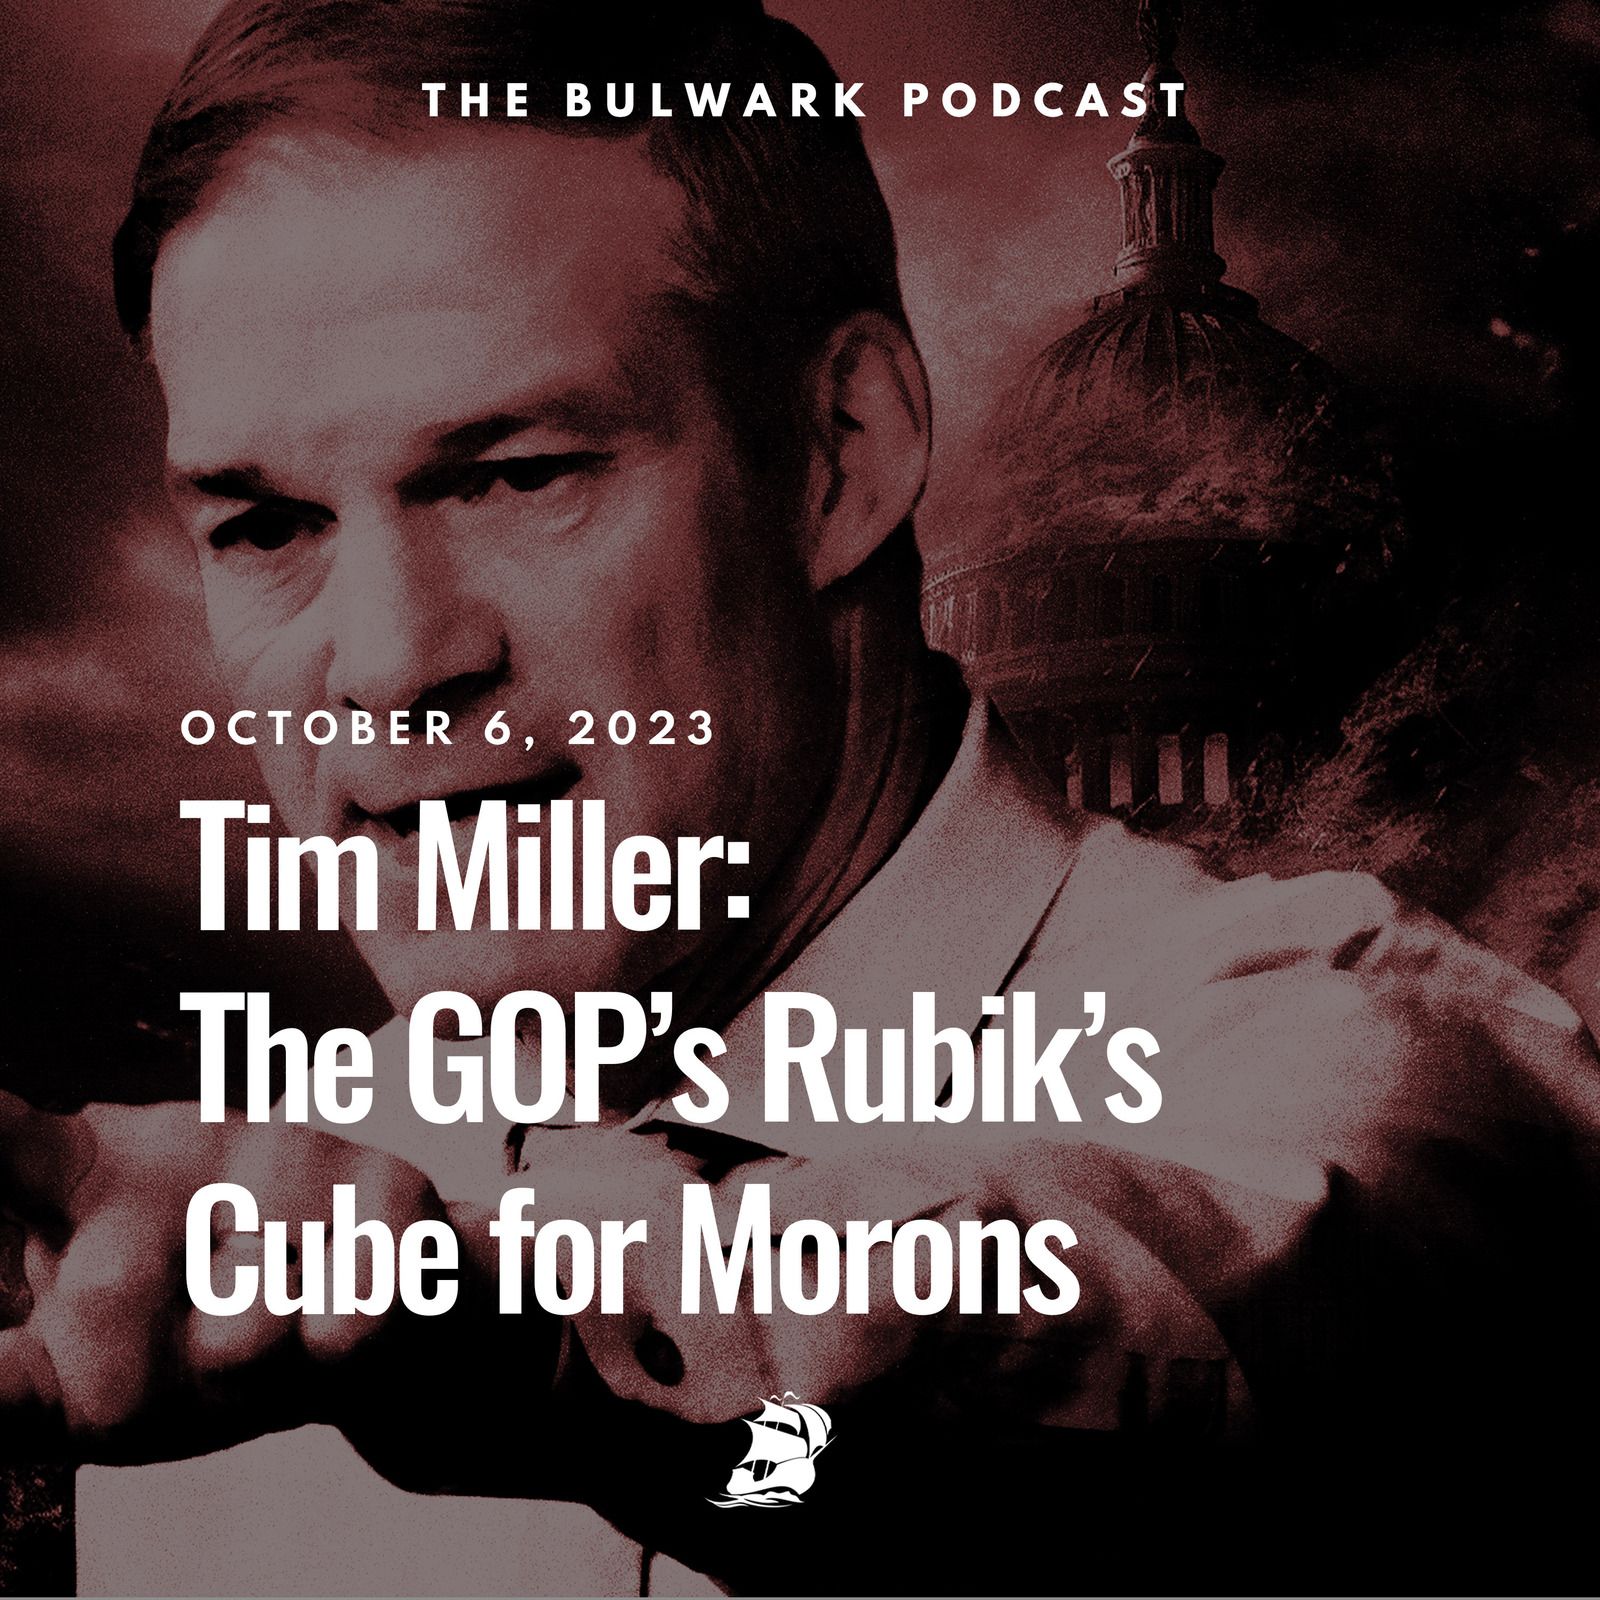 The GOP’s Rubik’s Cube for Morons by The Bulwark Podcast